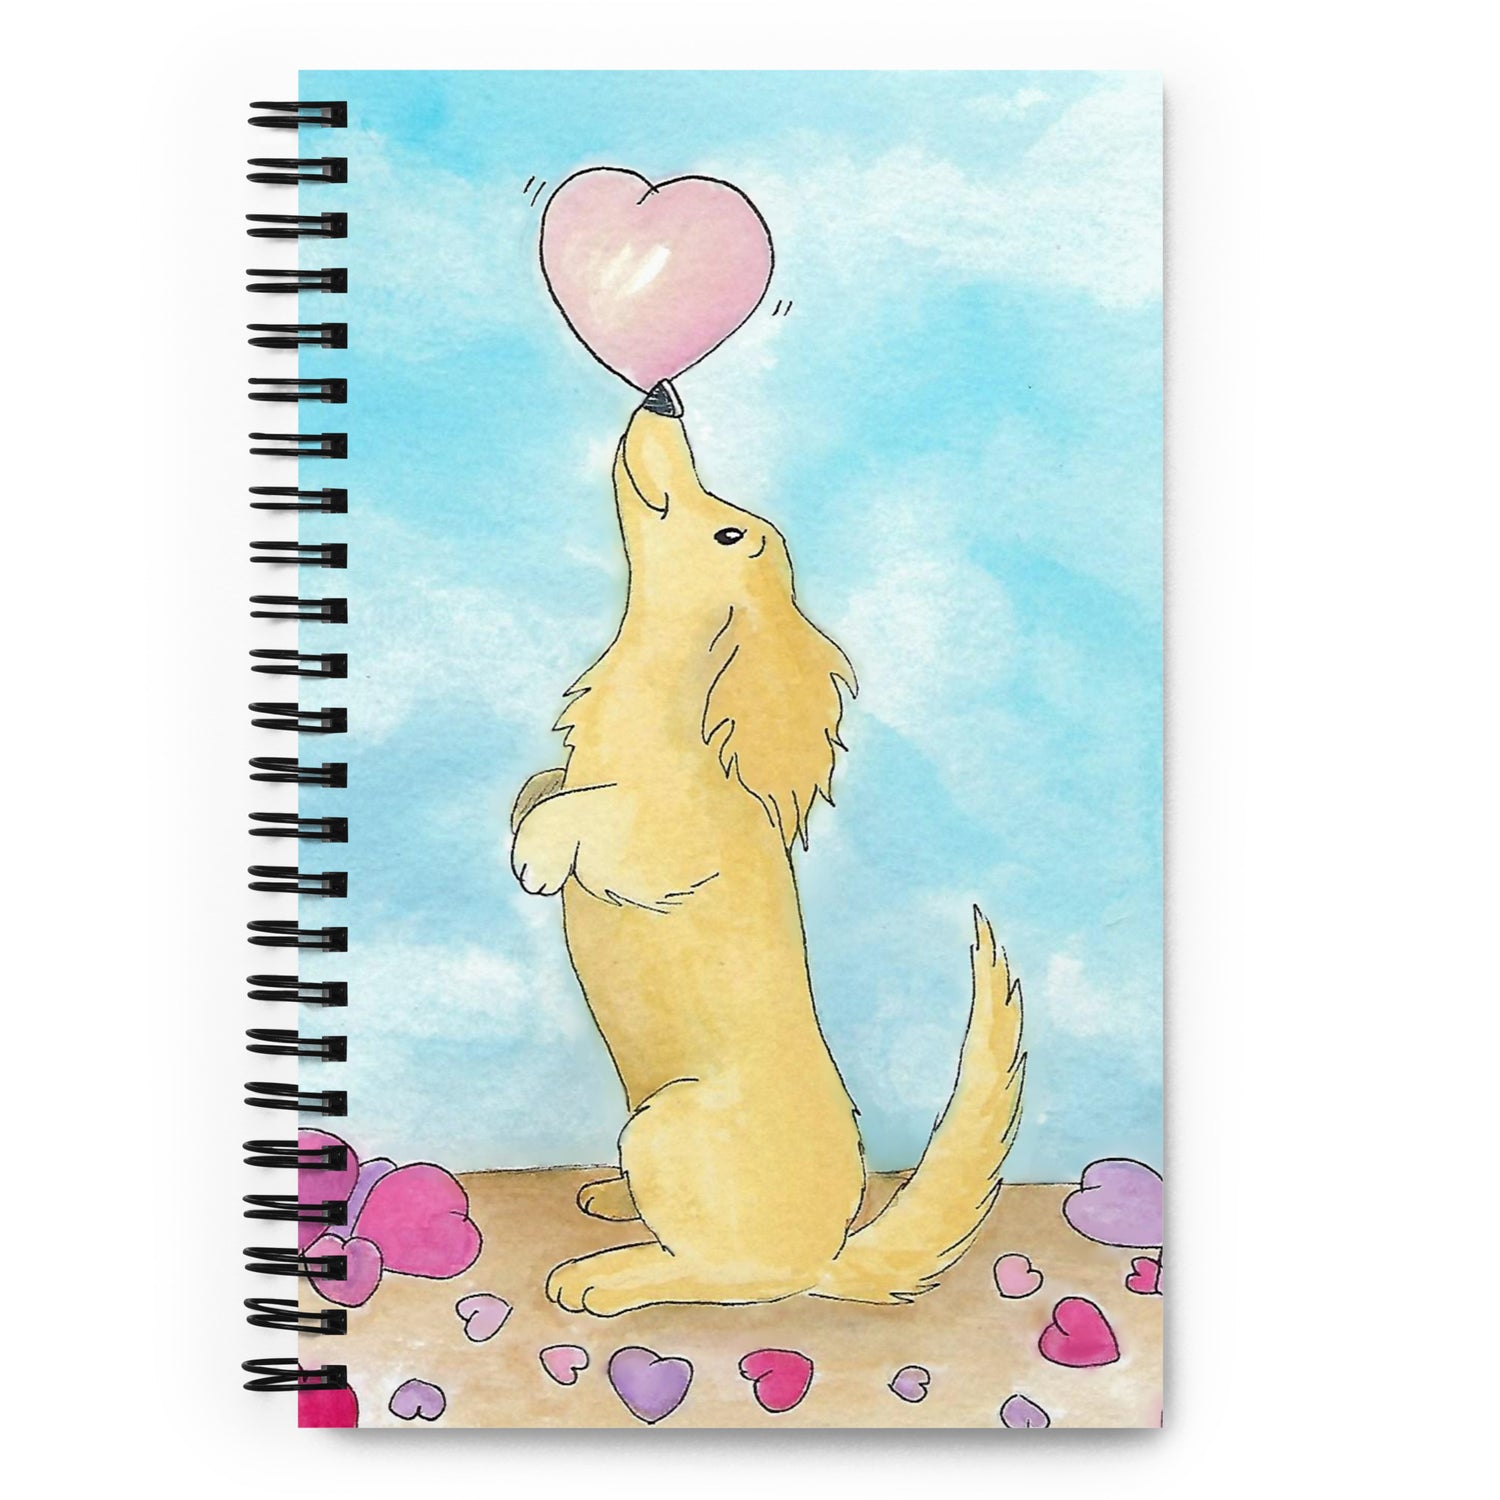 Spiral bound notebook with soft touch cover and 140 dotted pages. Cover features watercolor painting of a puppy balancing a heart on his nose. Measures 5.5 inches by 8.5 inches.